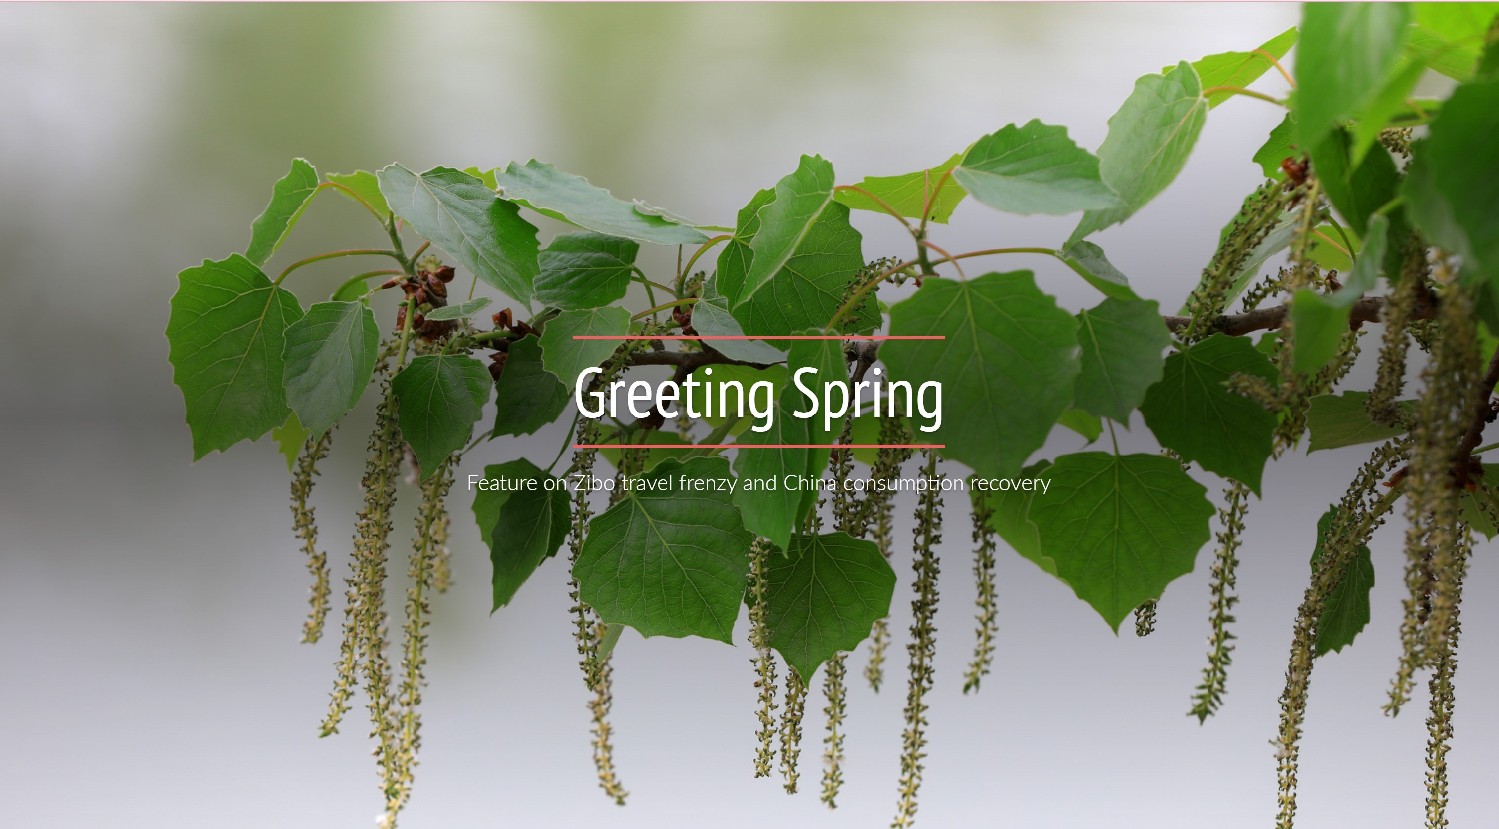 Greeting spring: Feature on Zibo travel frenzy and China consumption recovery